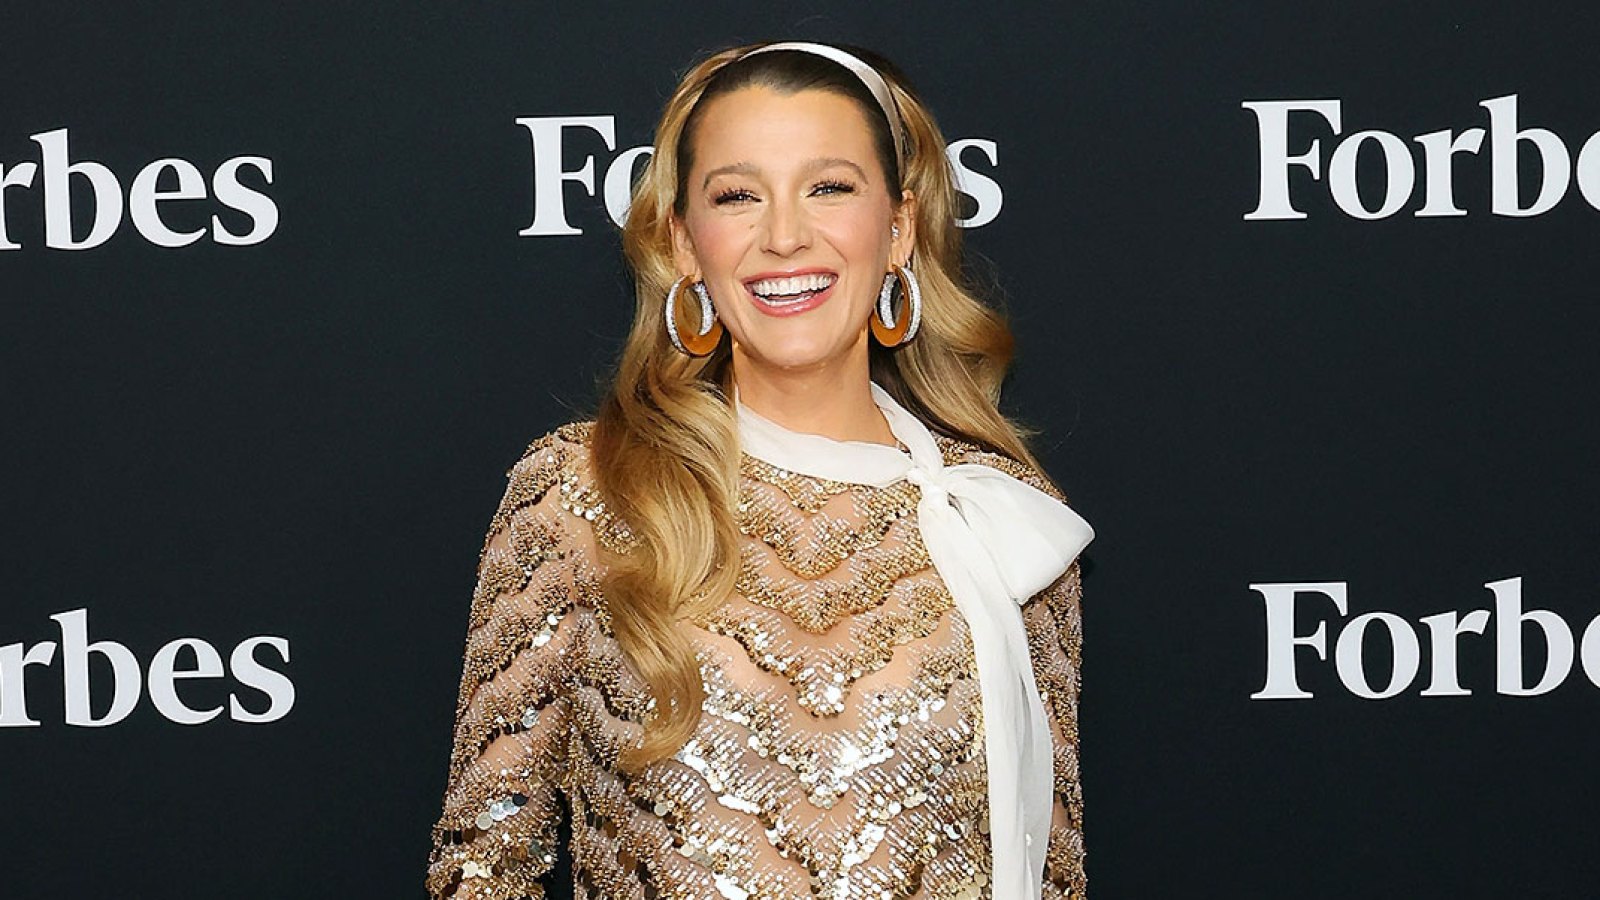 Blake Lively and SJP go wild for Louboutin's 'Alex' shoes - Telegraph